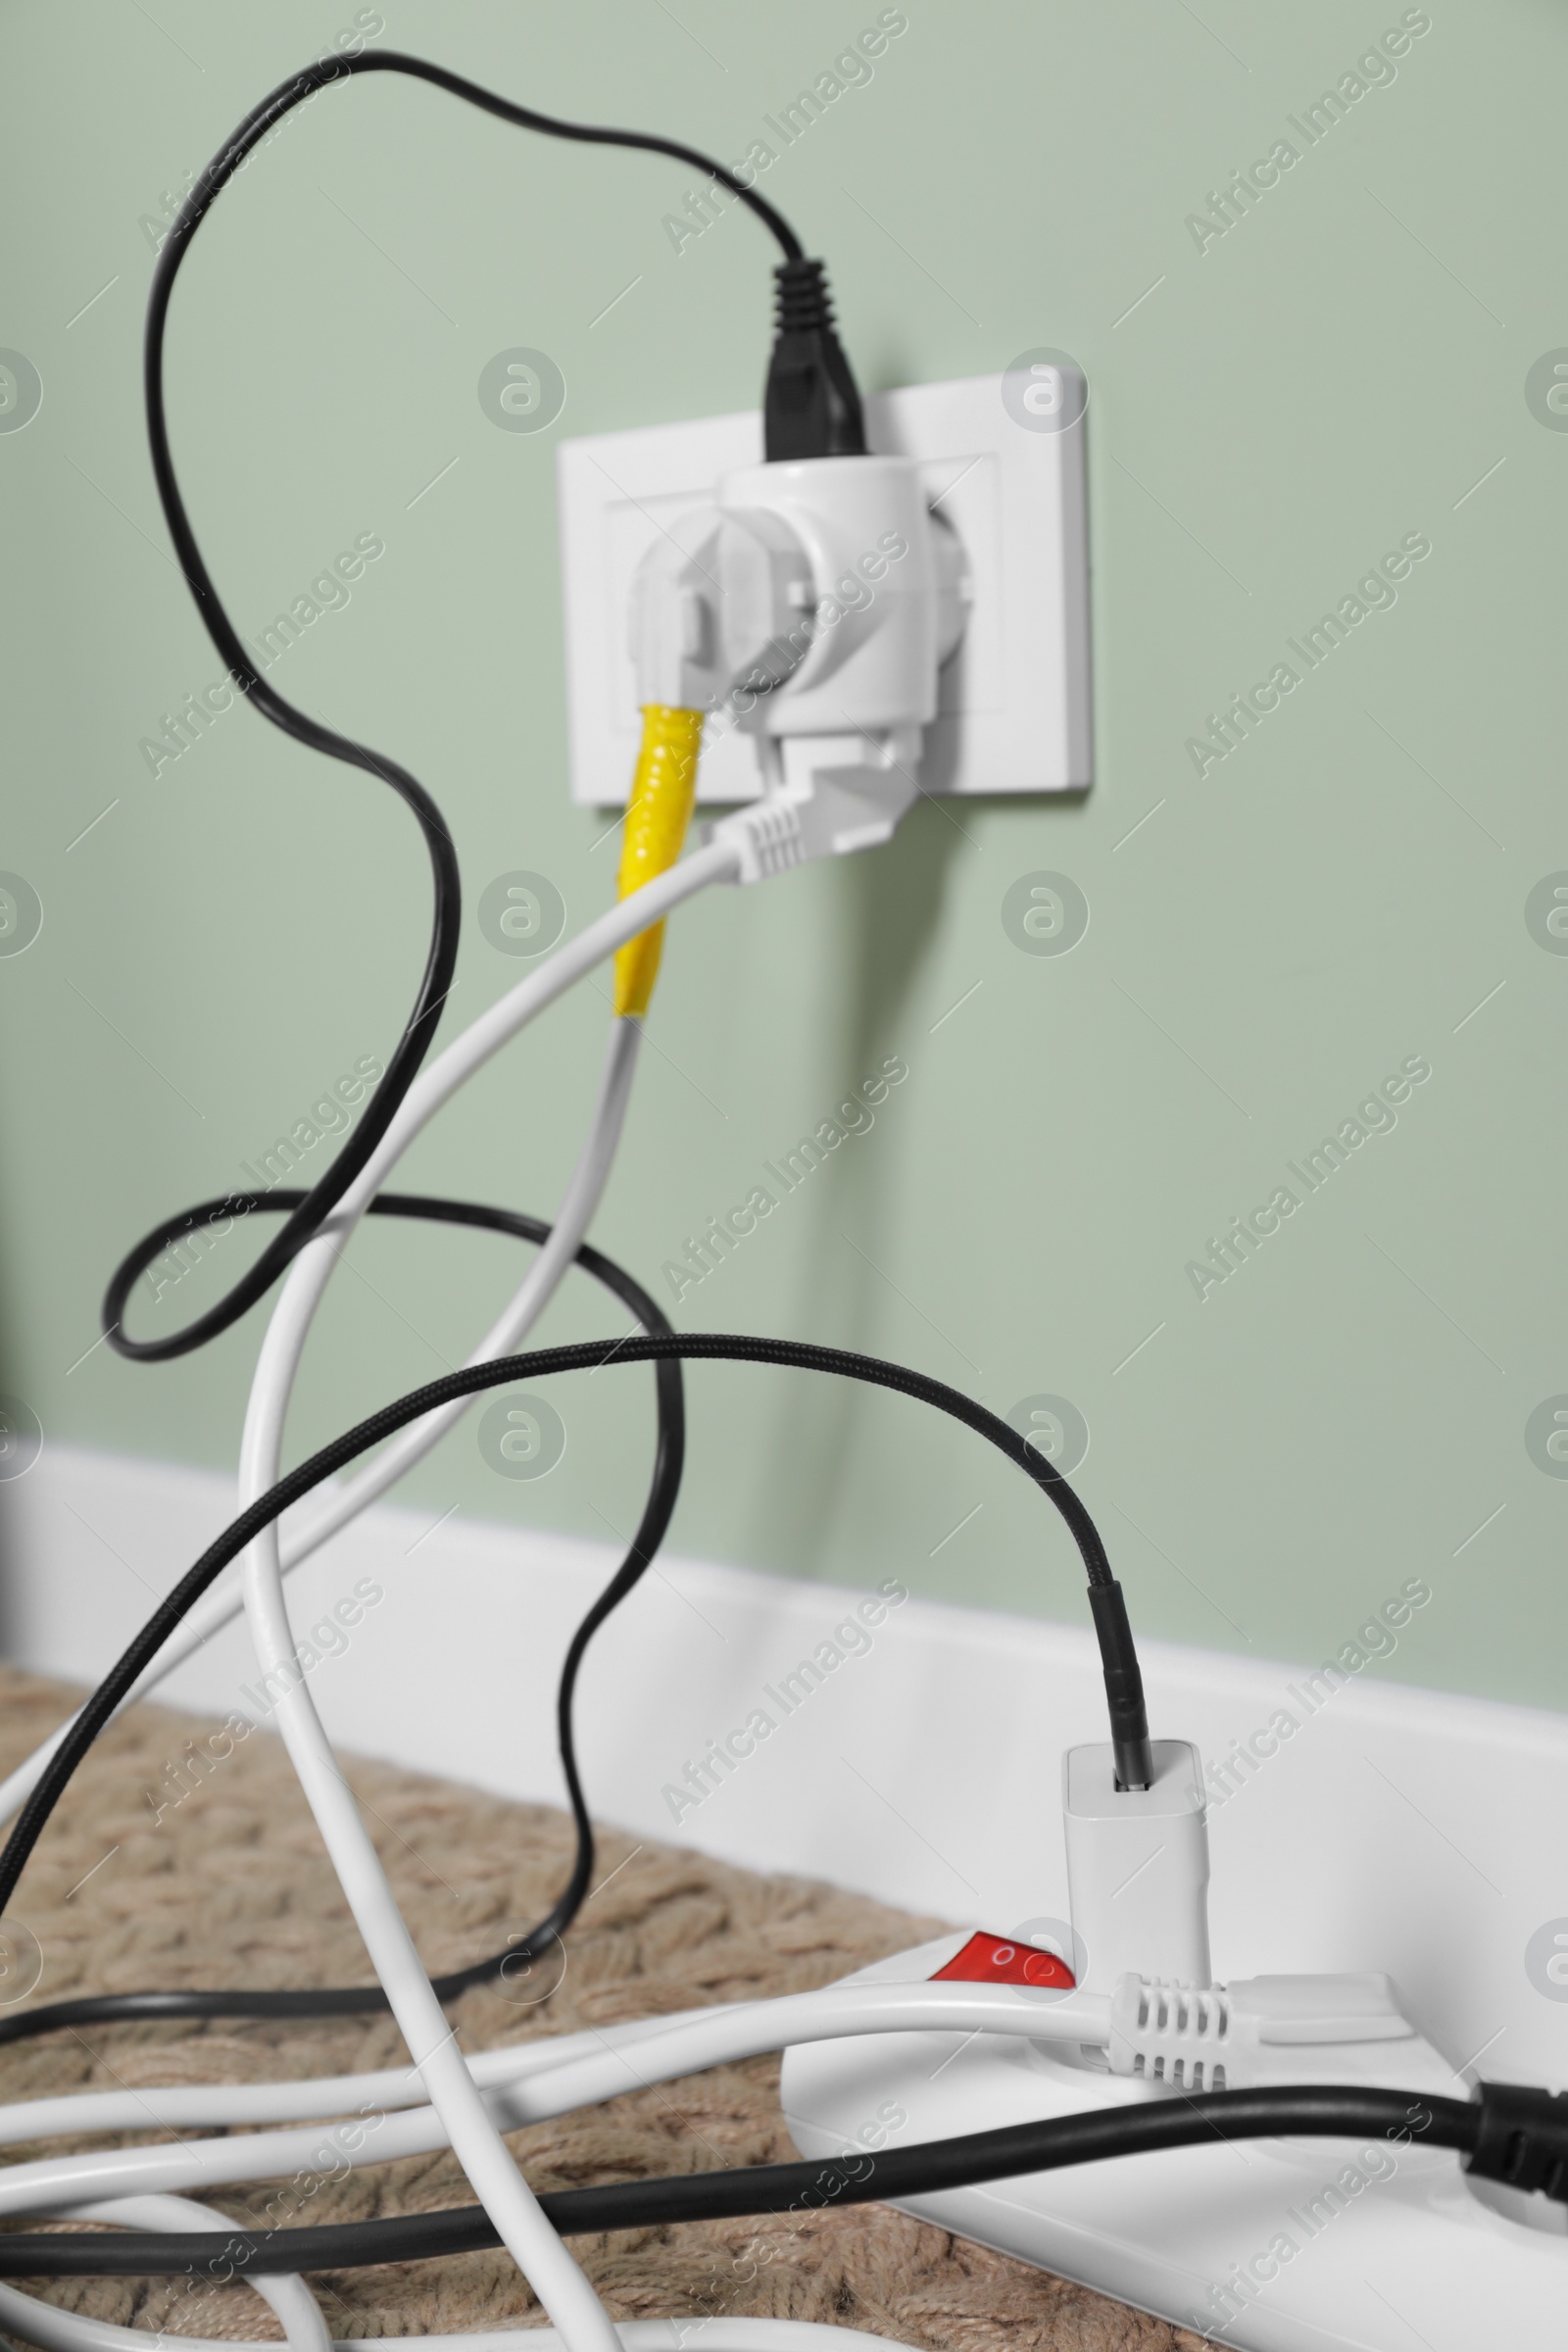 Photo of Different electrical plugs in socket and power strip on floor indoors, closeup